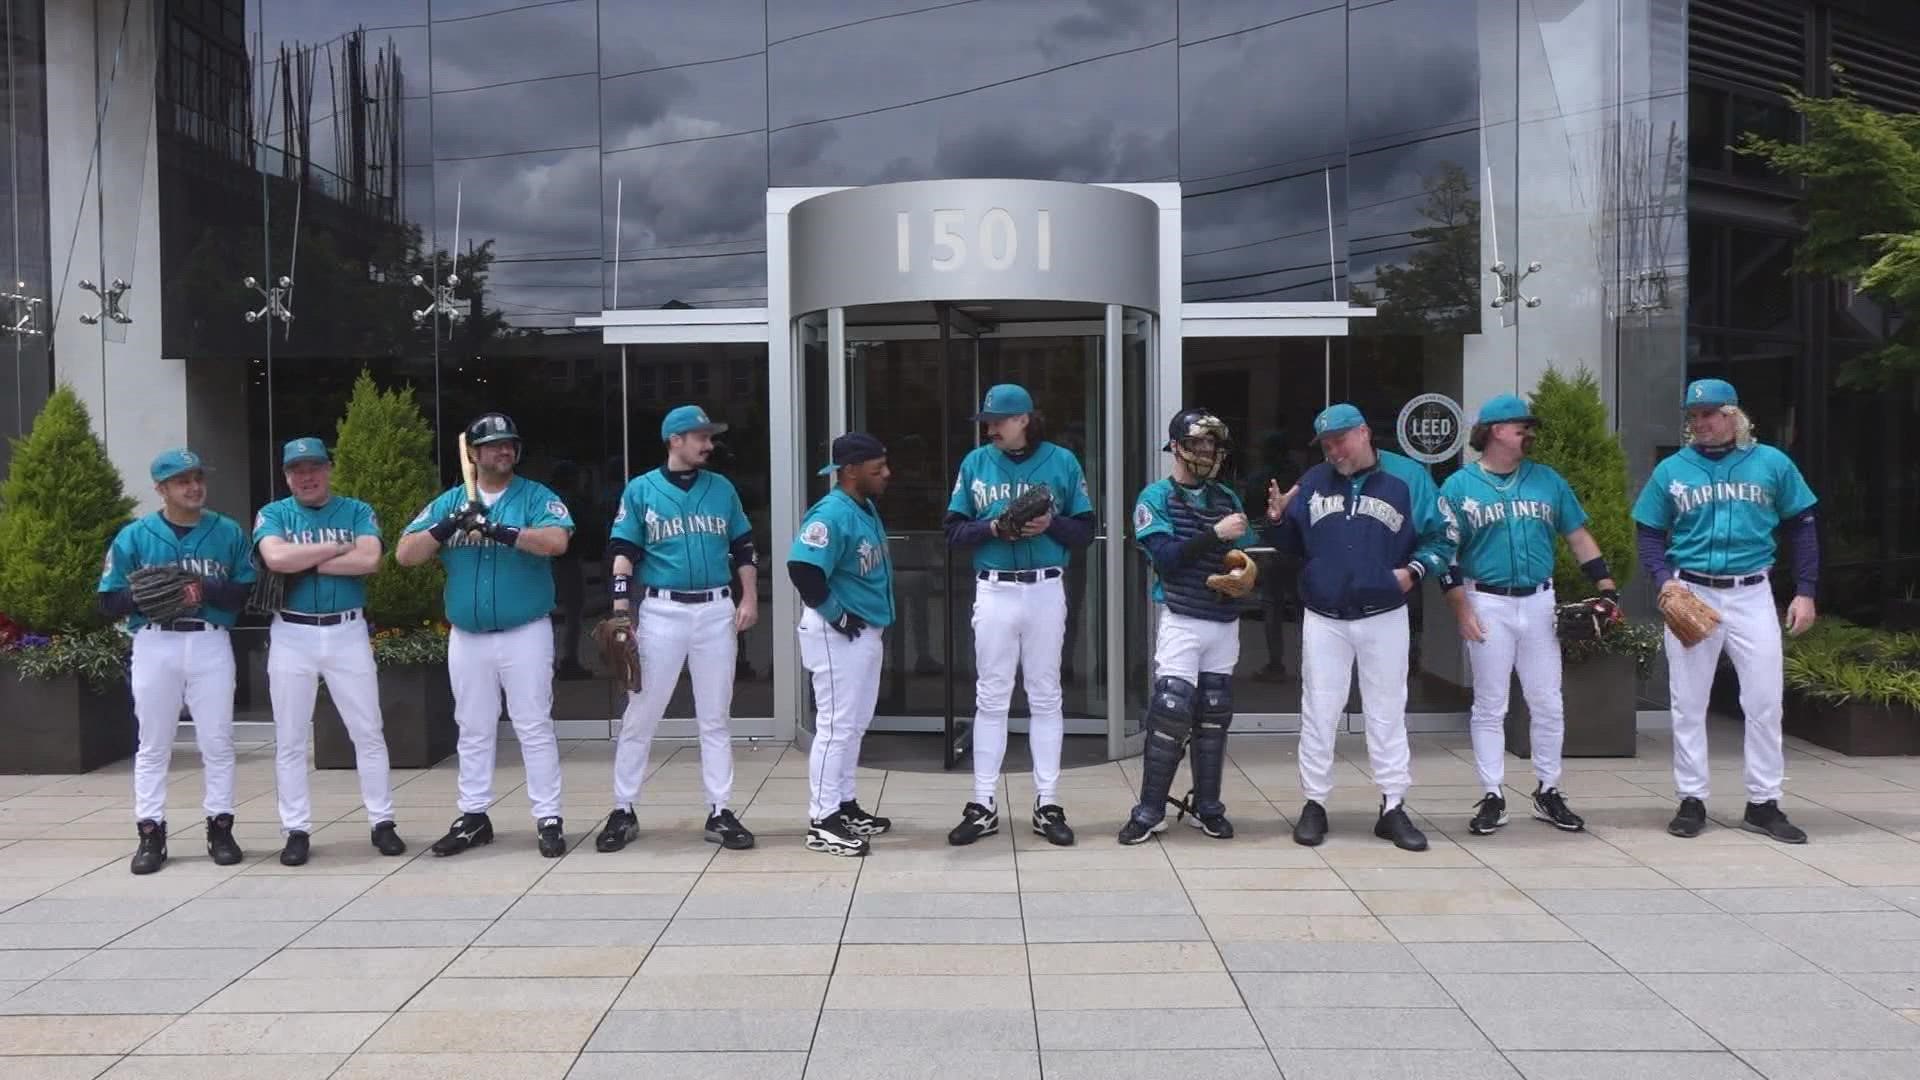 Over the past several years, Tyler Milam has assembled authentic vintage uniforms and some dedicated friends to recreate the legendary 1995 Mariners squad.